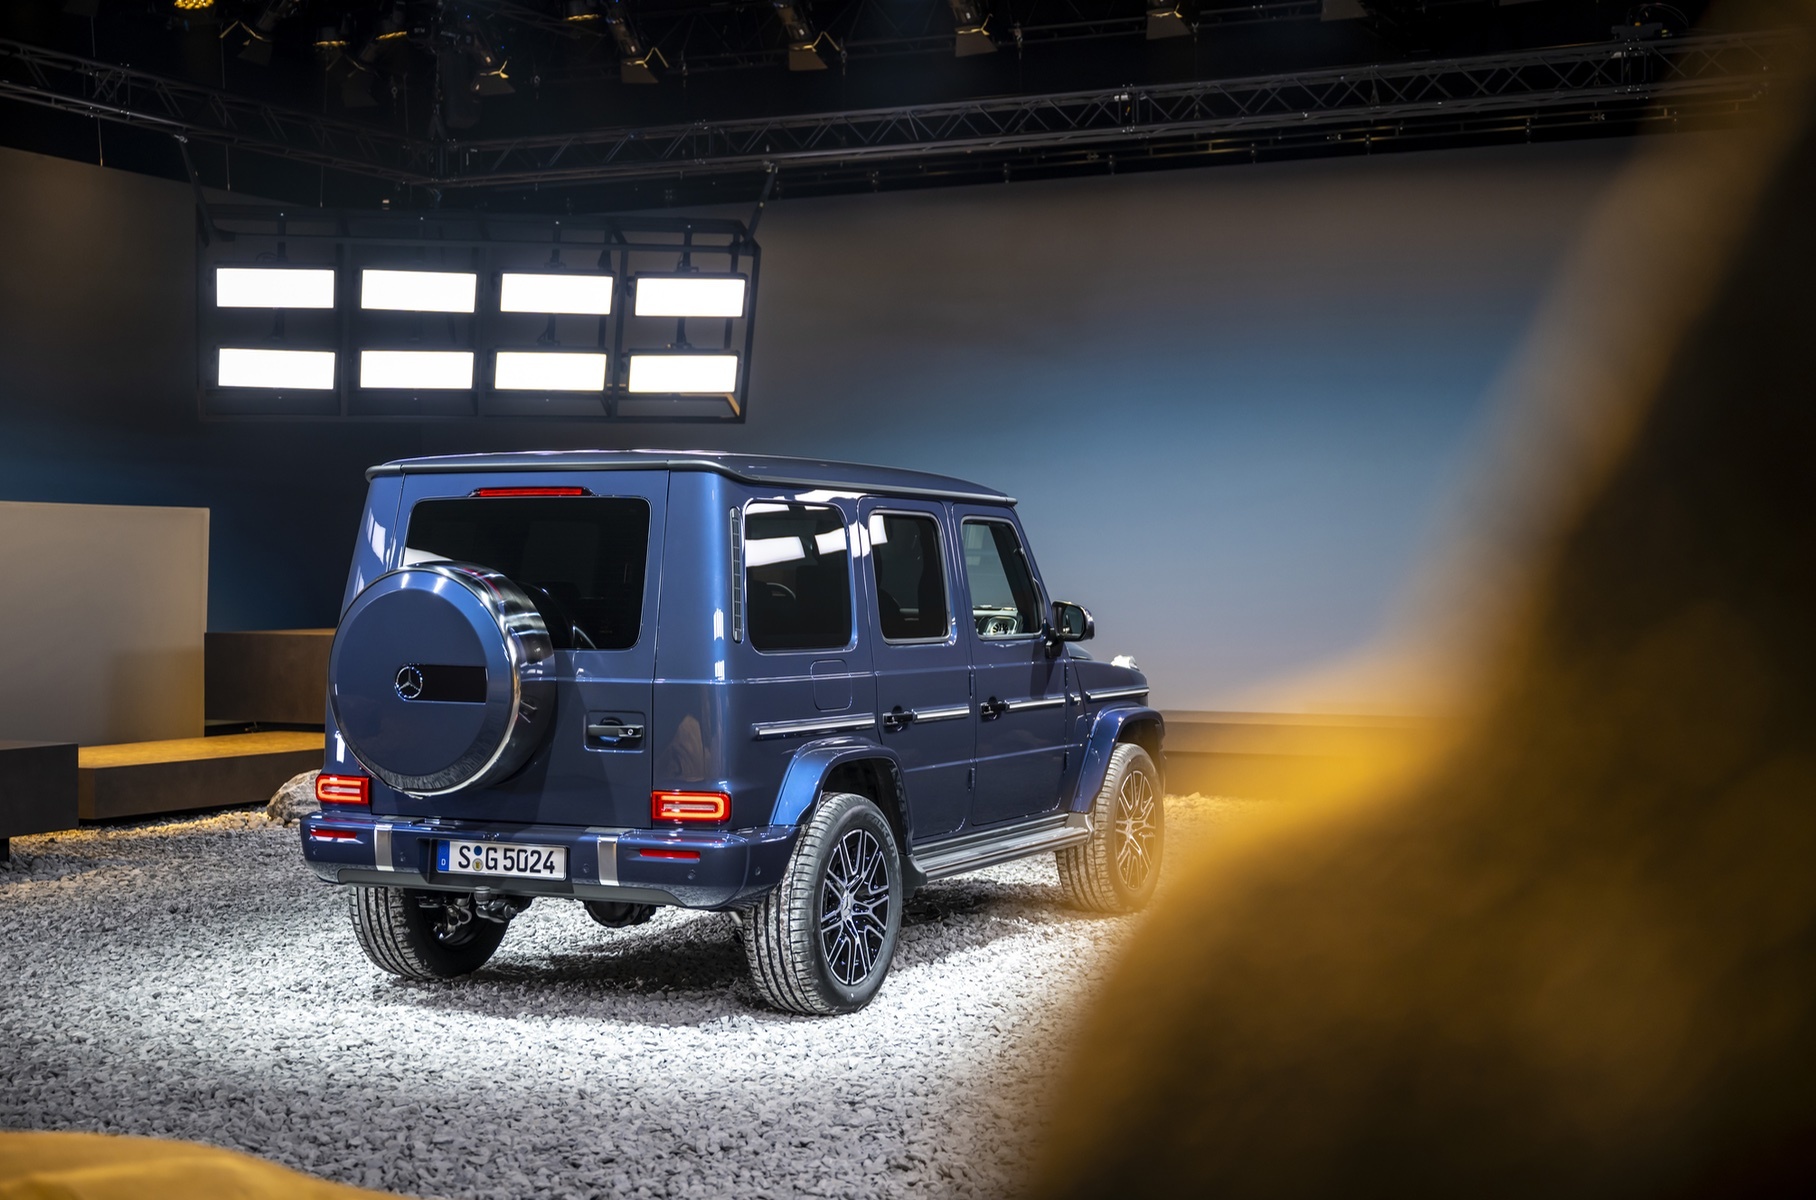 The MercedesBenz GClass SUV has been updated and received new options